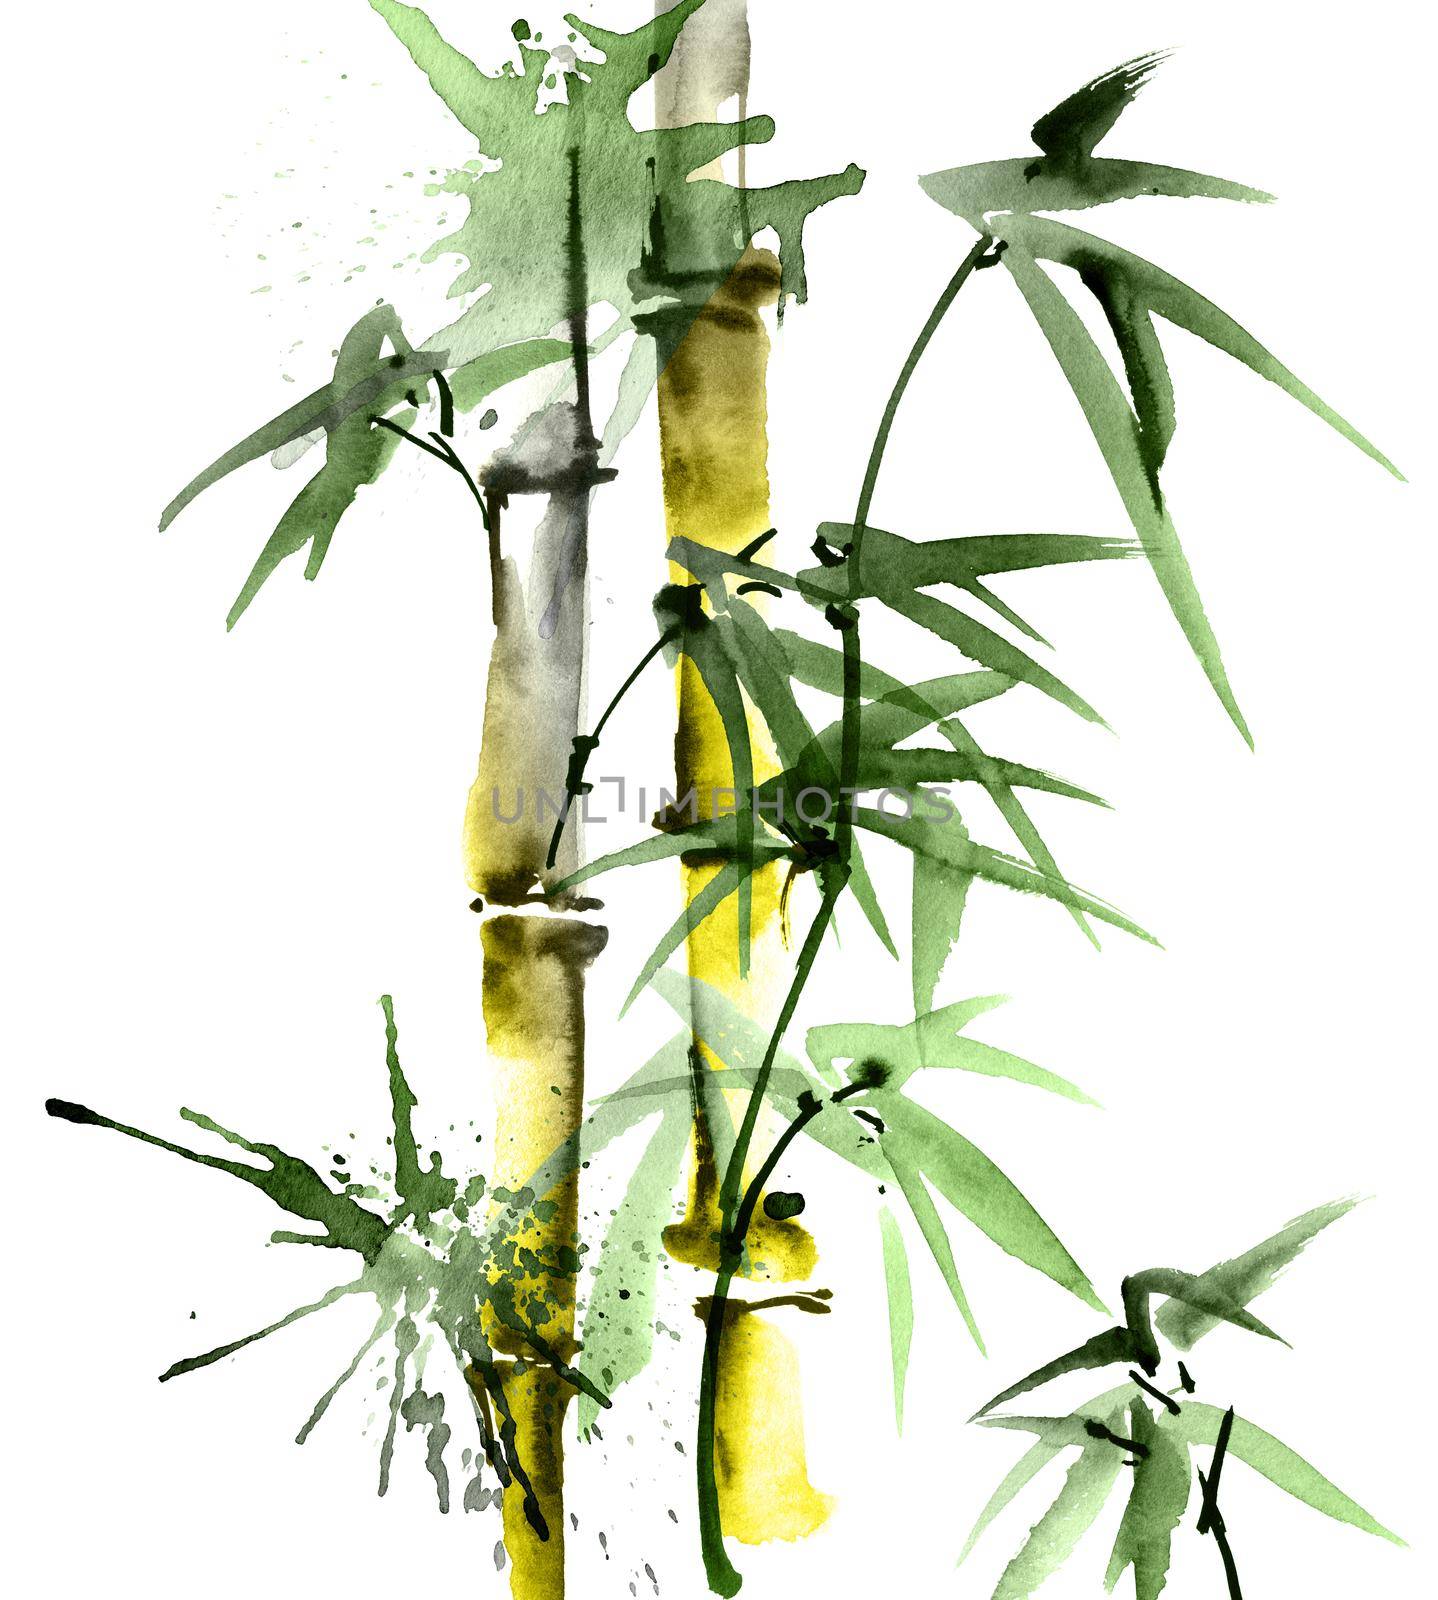 Watercolor illustration of bamboo with leaves and watersplashes on white background. Oriental traditional painting, sumi-e.